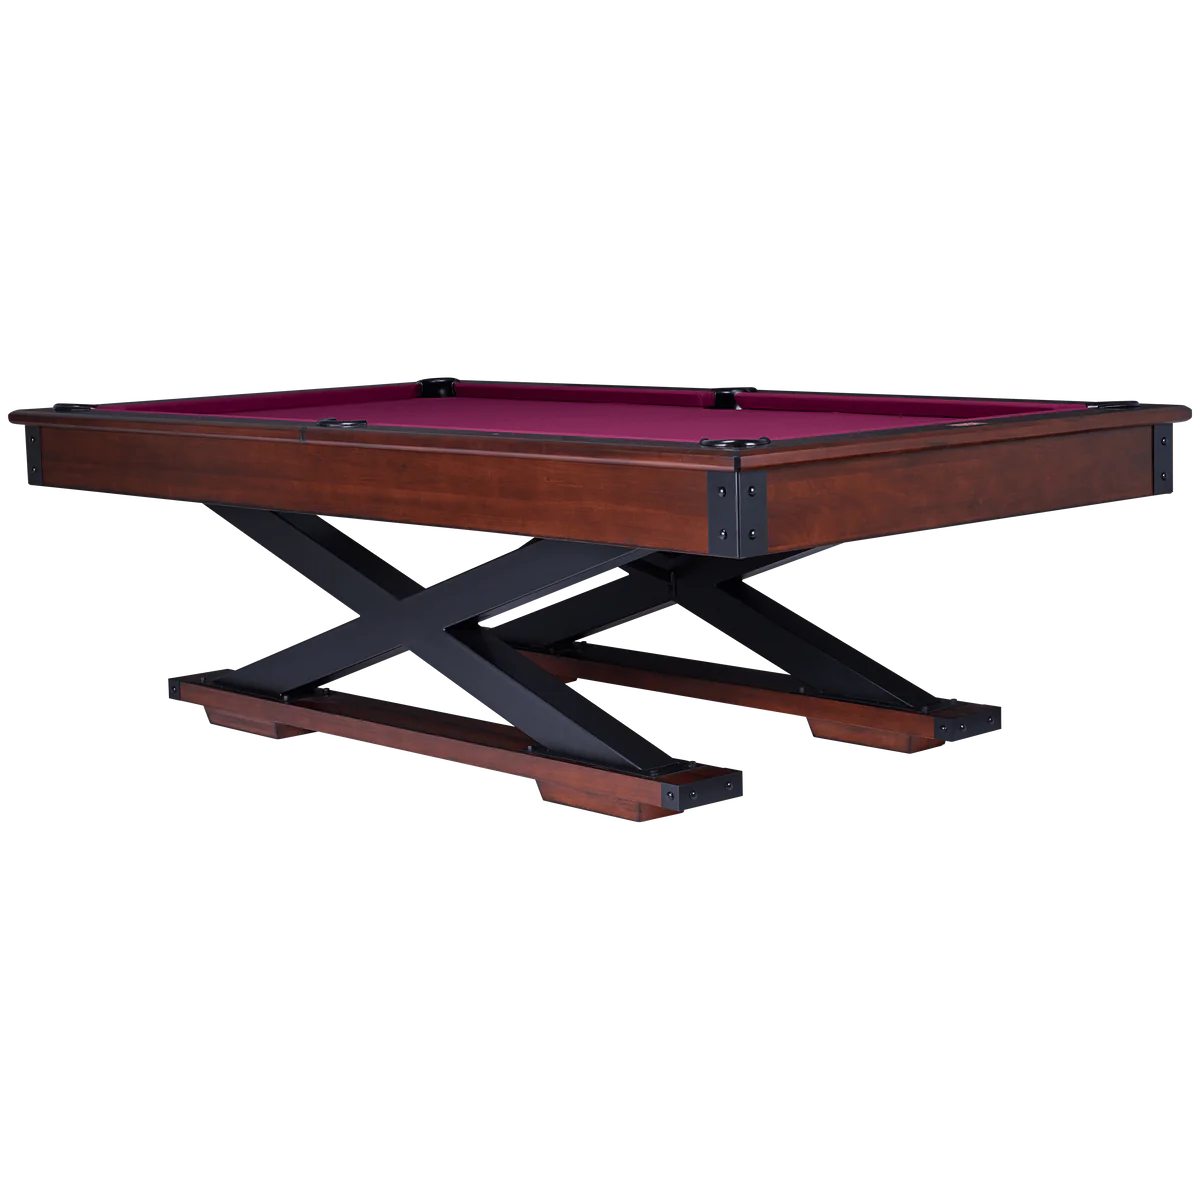 QUEST 8FT Pool Table - Navajo Finish